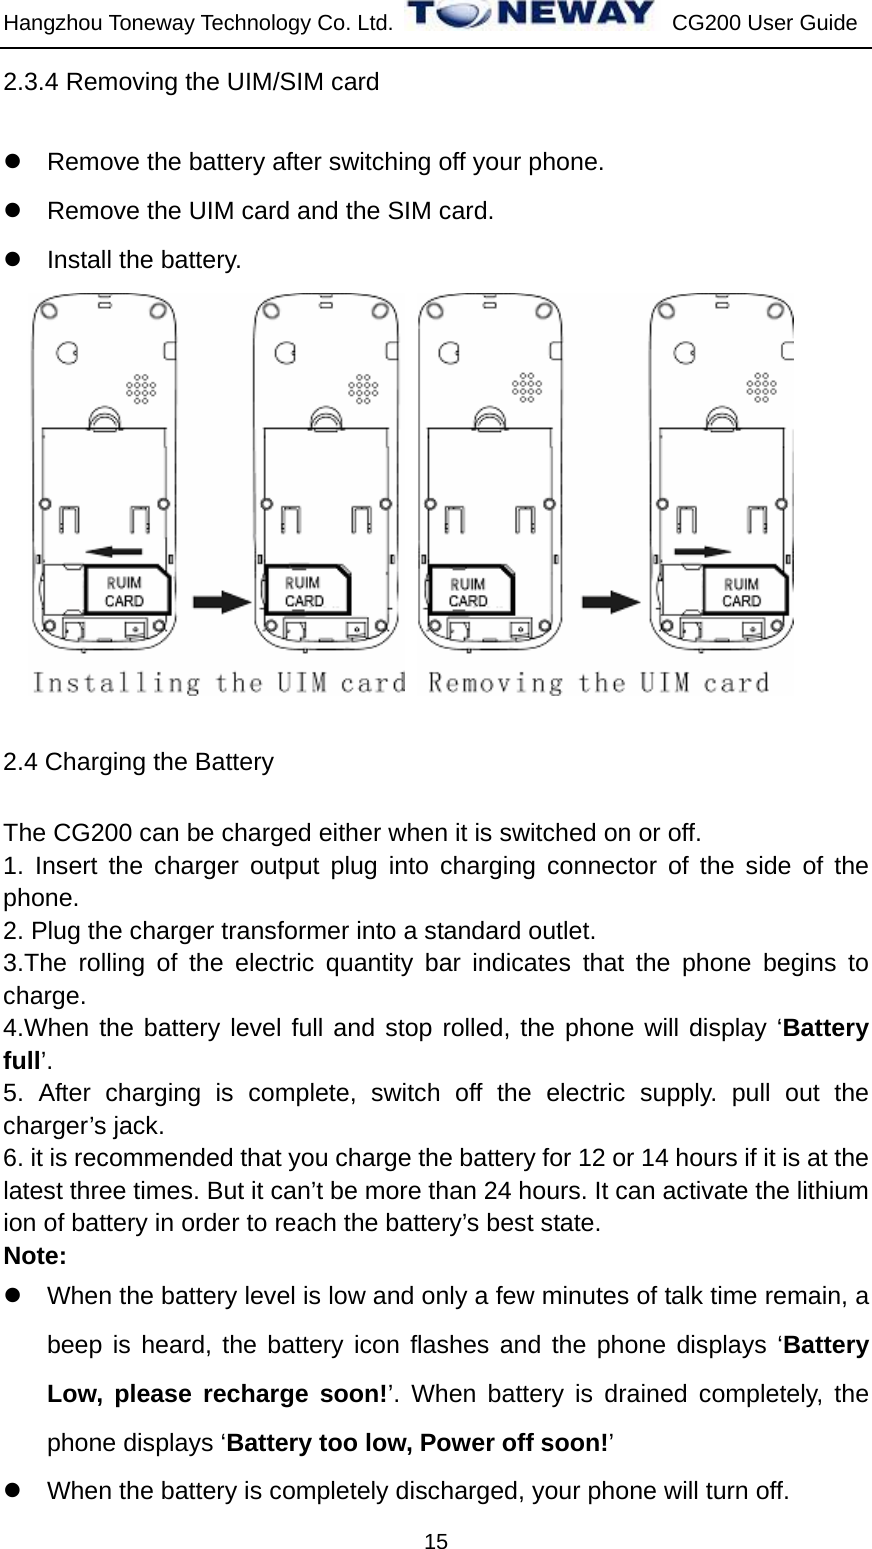 Hangzhou Toneway Technology Co. Ltd.    CG200 User Guide 15 2.3.4 Removing the UIM/SIM card z  Remove the battery after switching off your phone. z  Remove the UIM card and the SIM card. z  Install the battery.       2.4 Charging the Battery The CG200 can be charged either when it is switched on or off. 1. Insert the charger output plug into charging connector of the side of the phone. 2. Plug the charger transformer into a standard outlet. 3.The rolling of the electric quantity bar indicates that the phone begins to charge. 4.When the battery level full and stop rolled, the phone will display ‘Battery full’. 5. After charging is complete, switch off the electric supply. pull out the charger’s jack. 6. it is recommended that you charge the battery for 12 or 14 hours if it is at the latest three times. But it can’t be more than 24 hours. It can activate the lithium ion of battery in order to reach the battery’s best state. Note: z  When the battery level is low and only a few minutes of talk time remain, a beep is heard, the battery icon flashes and the phone displays ‘Battery Low, please recharge soon!’. When battery is drained completely, the phone displays ‘Battery too low, Power off soon!’ z  When the battery is completely discharged, your phone will turn off. 